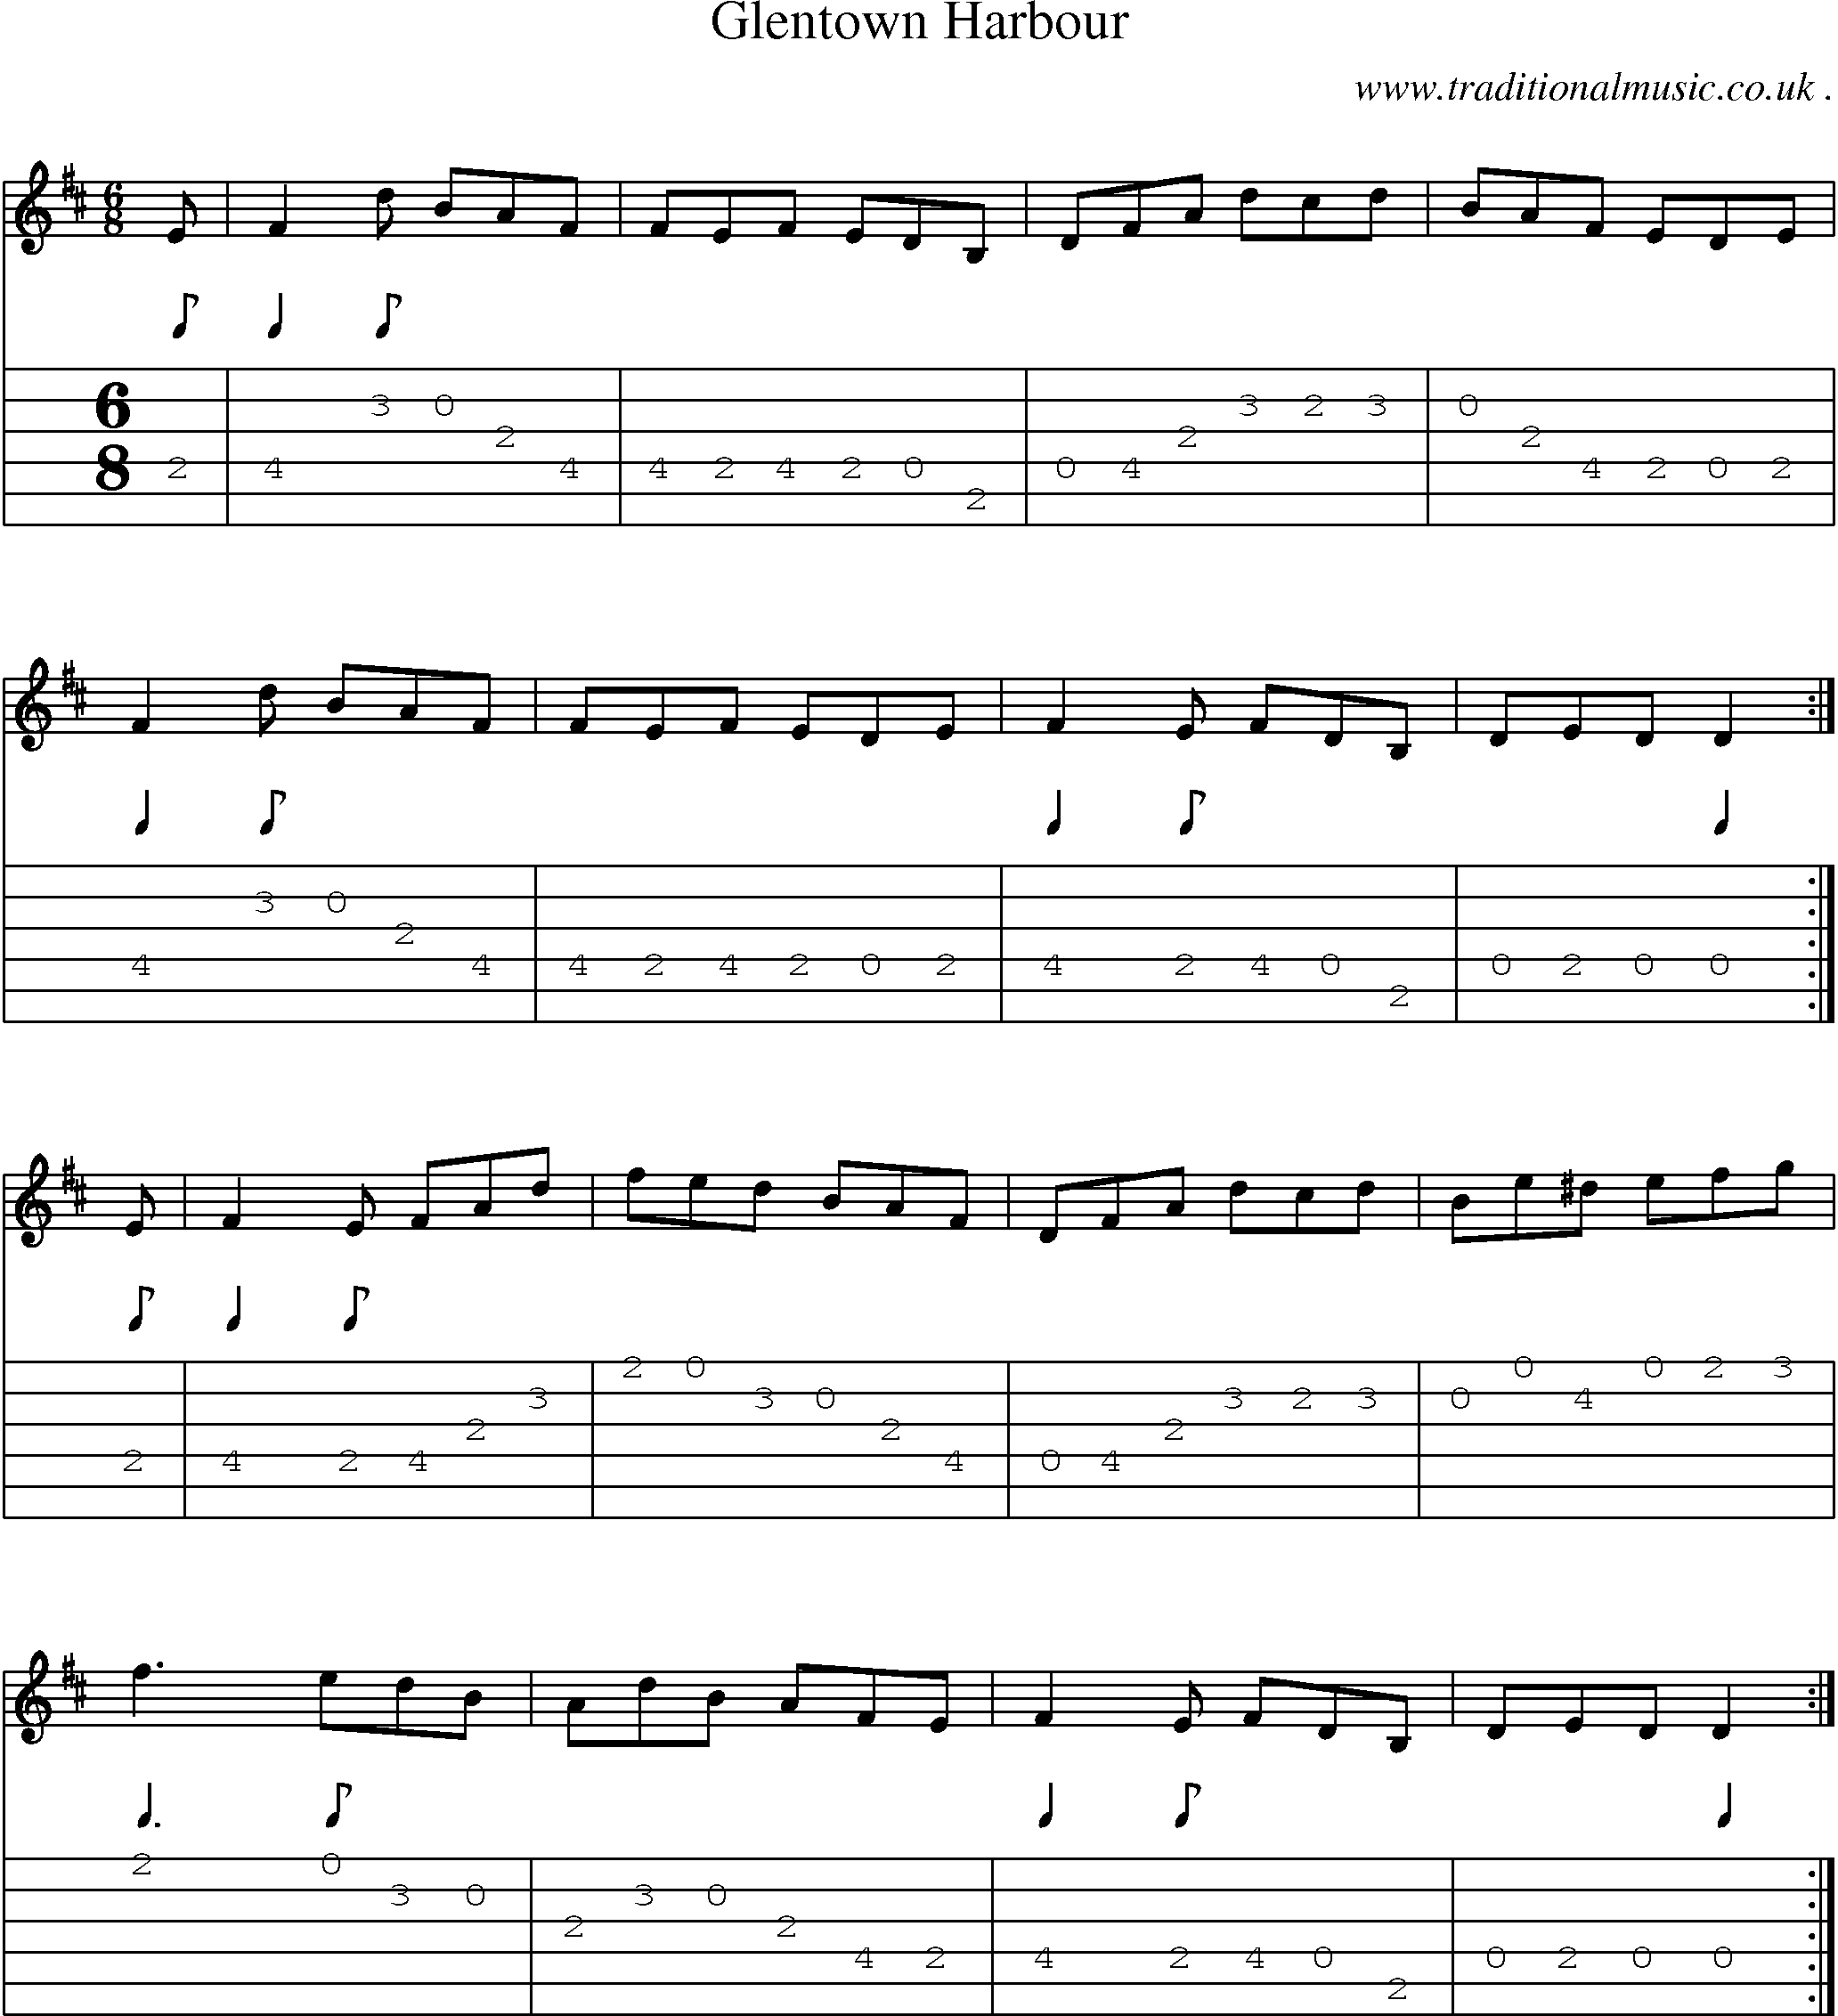 Sheet-music  score, Chords and Guitar Tabs for Glentown Harbour